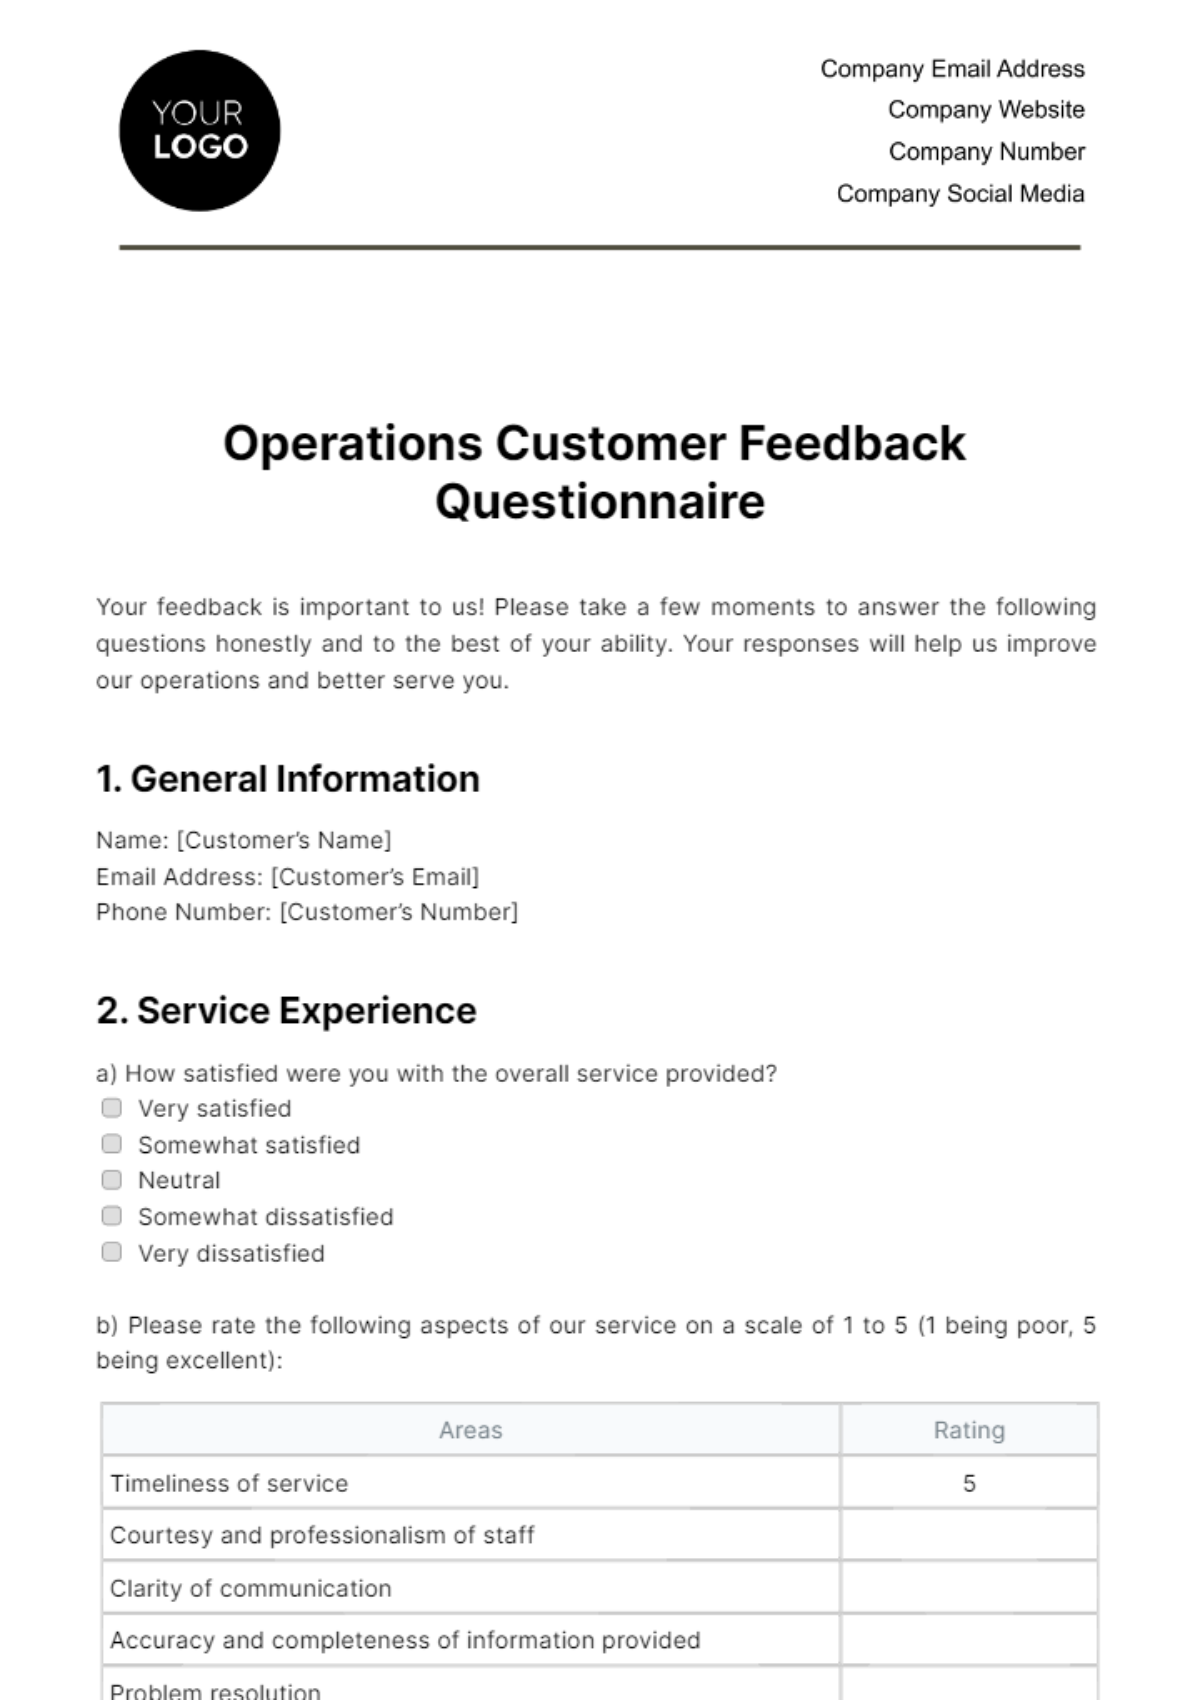 Free Operations Customer Feedback Questionnaire Template